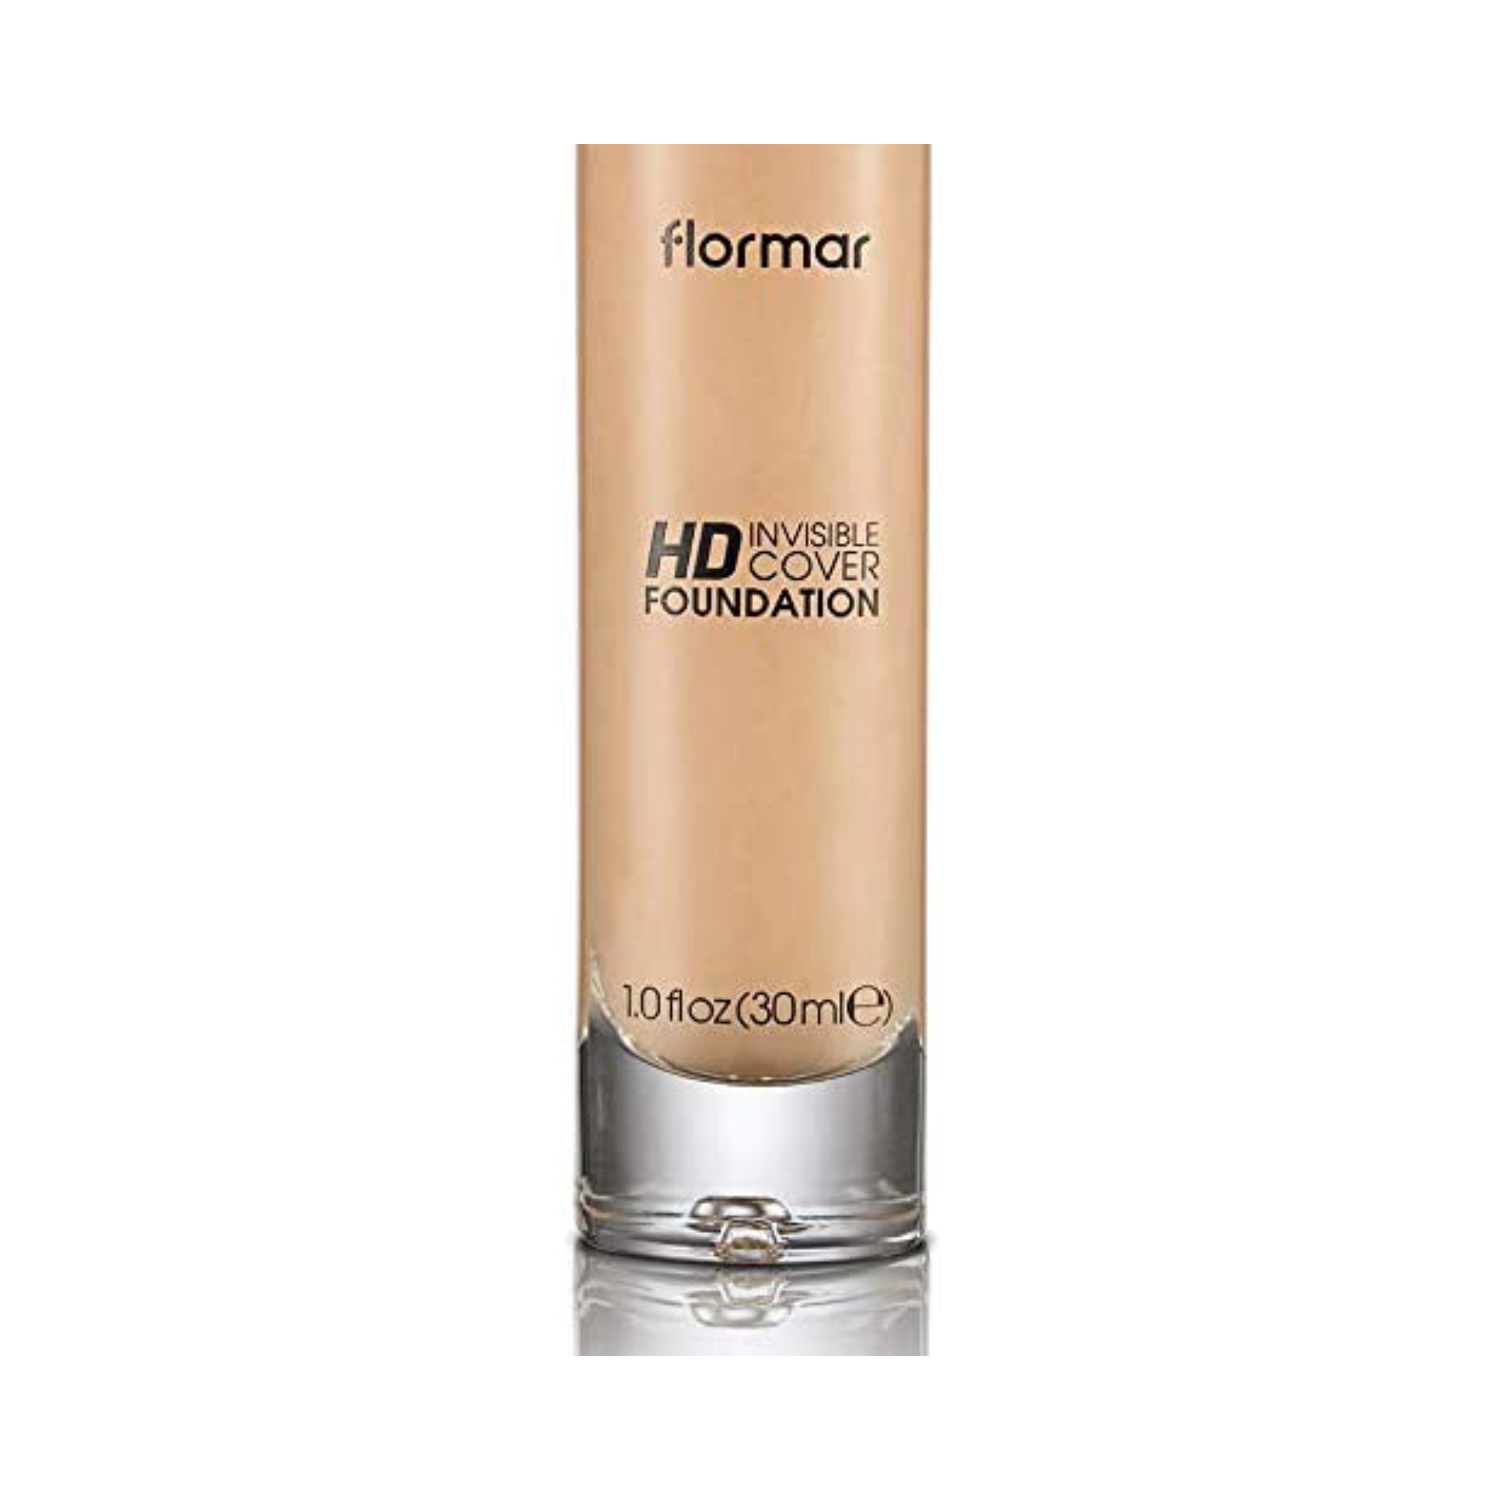 BUY Octinoxate (Flormar Smooth Touch Foundation 08 Medium Beige) 50 mg/mL  from GNH India at the best price available.